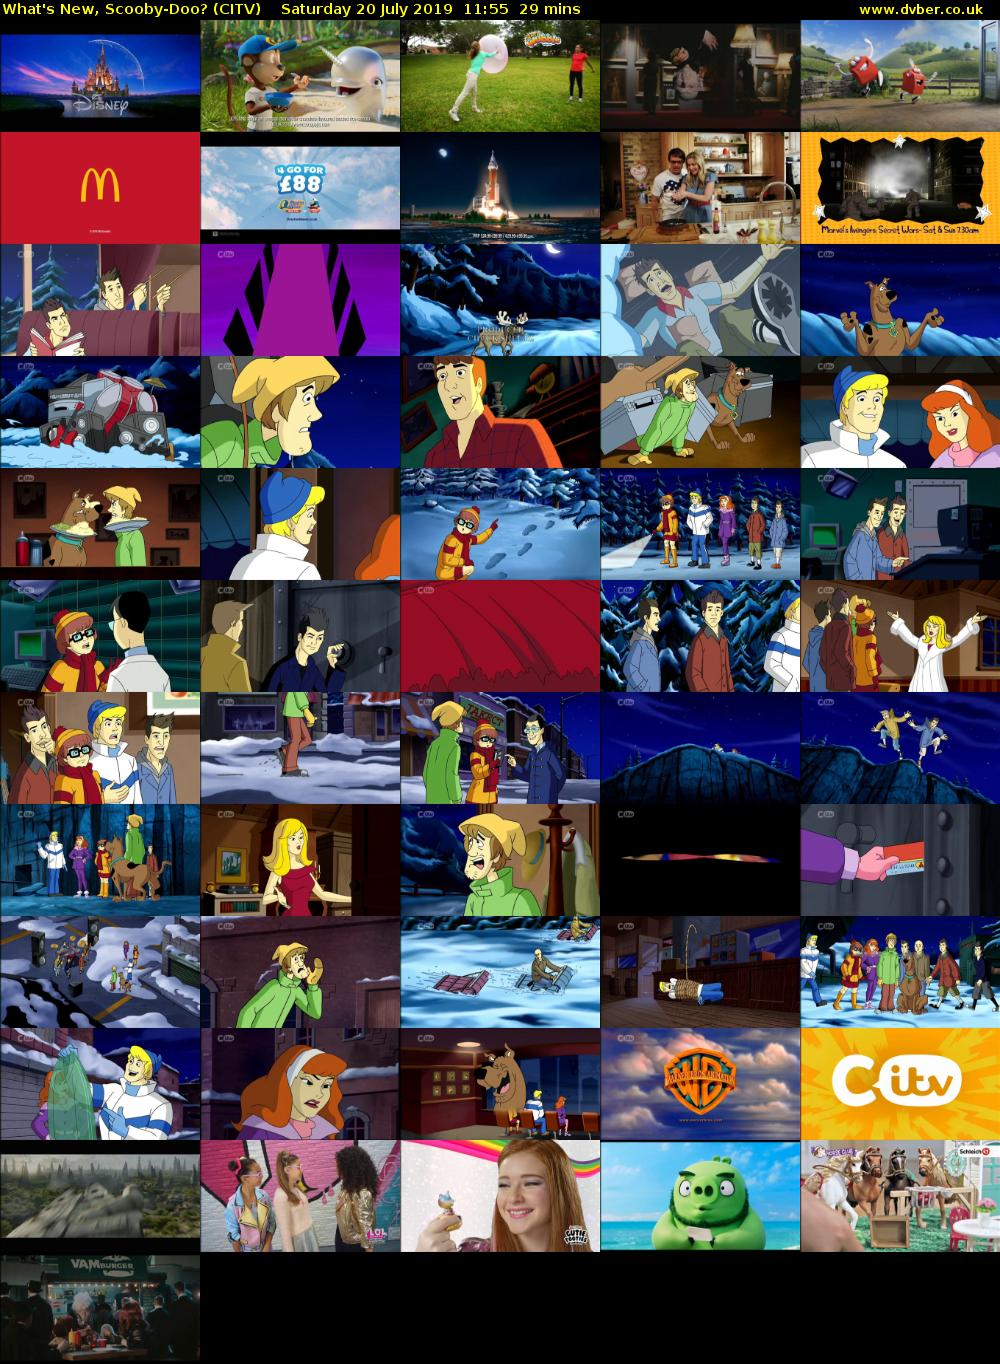 What's New, Scooby-Doo? (CITV) Saturday 20 July 2019 11:55 - 12:24